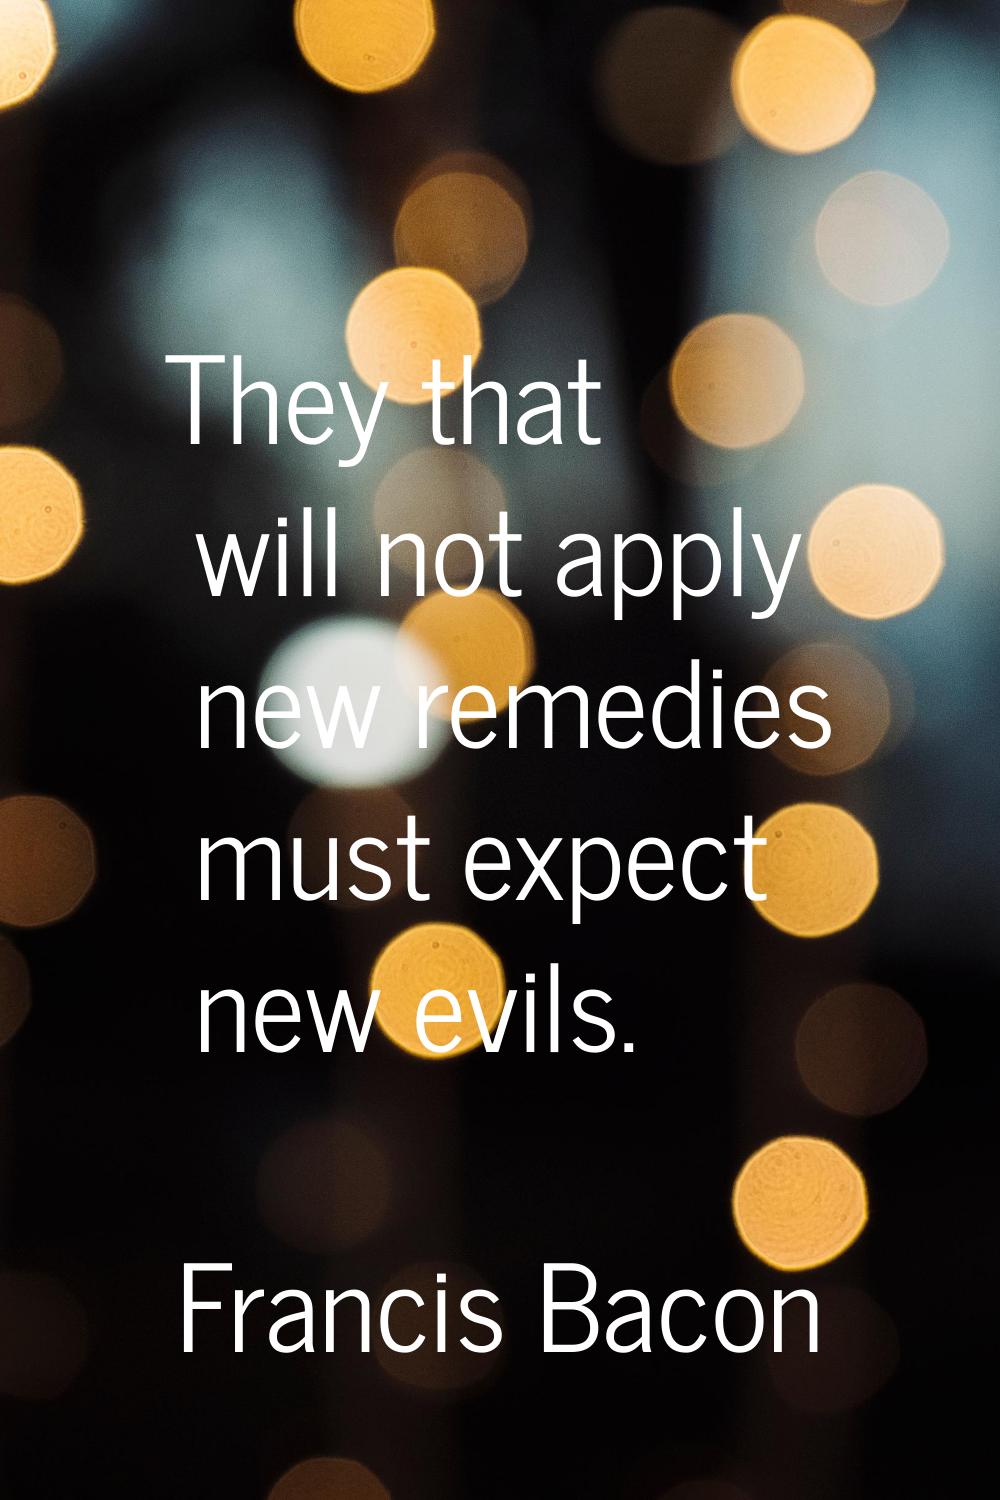 They that will not apply new remedies must expect new evils.